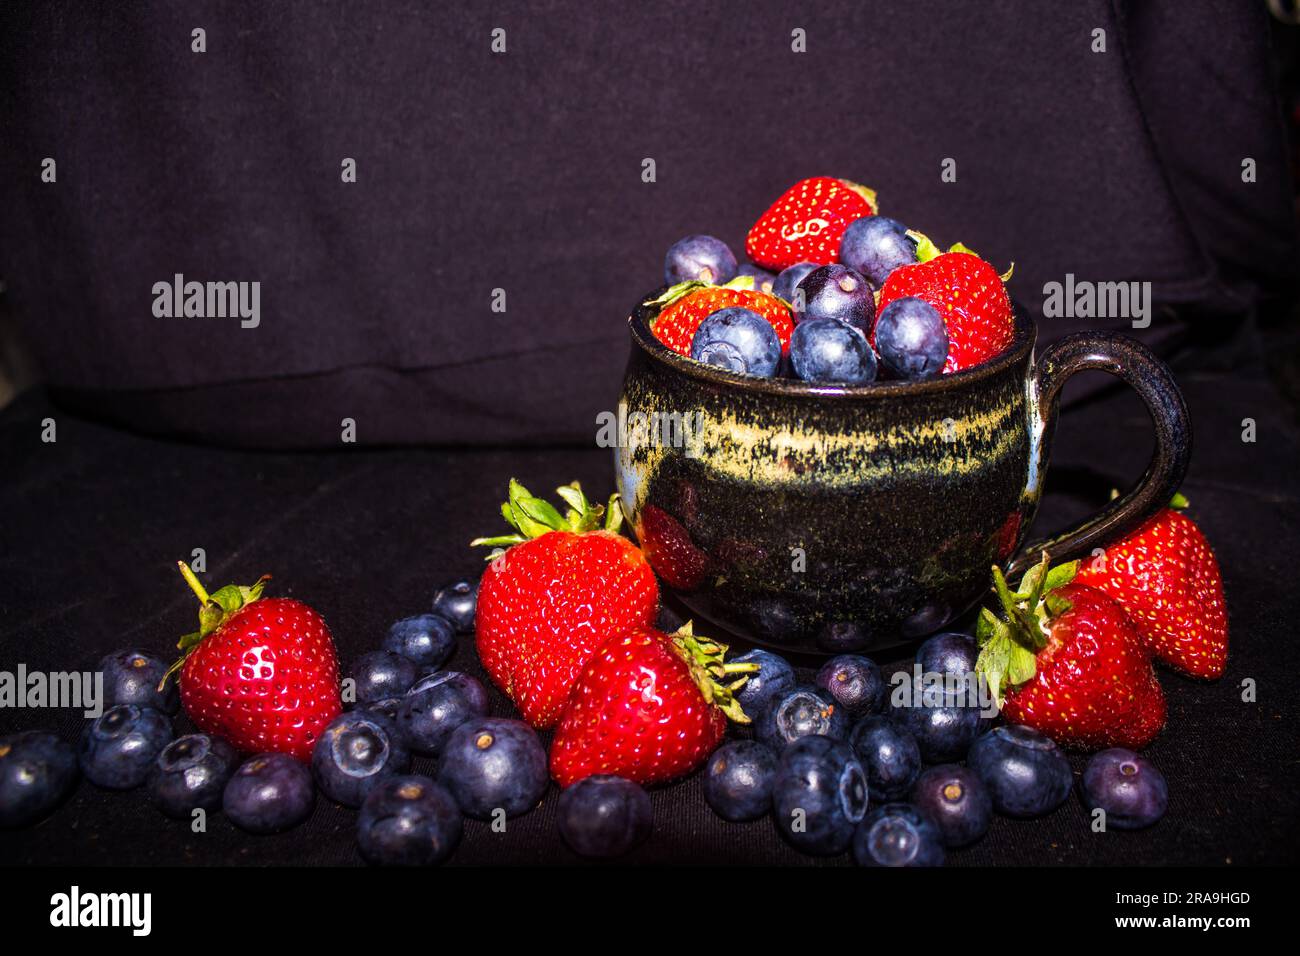 A Cup of Berries Stock Photo